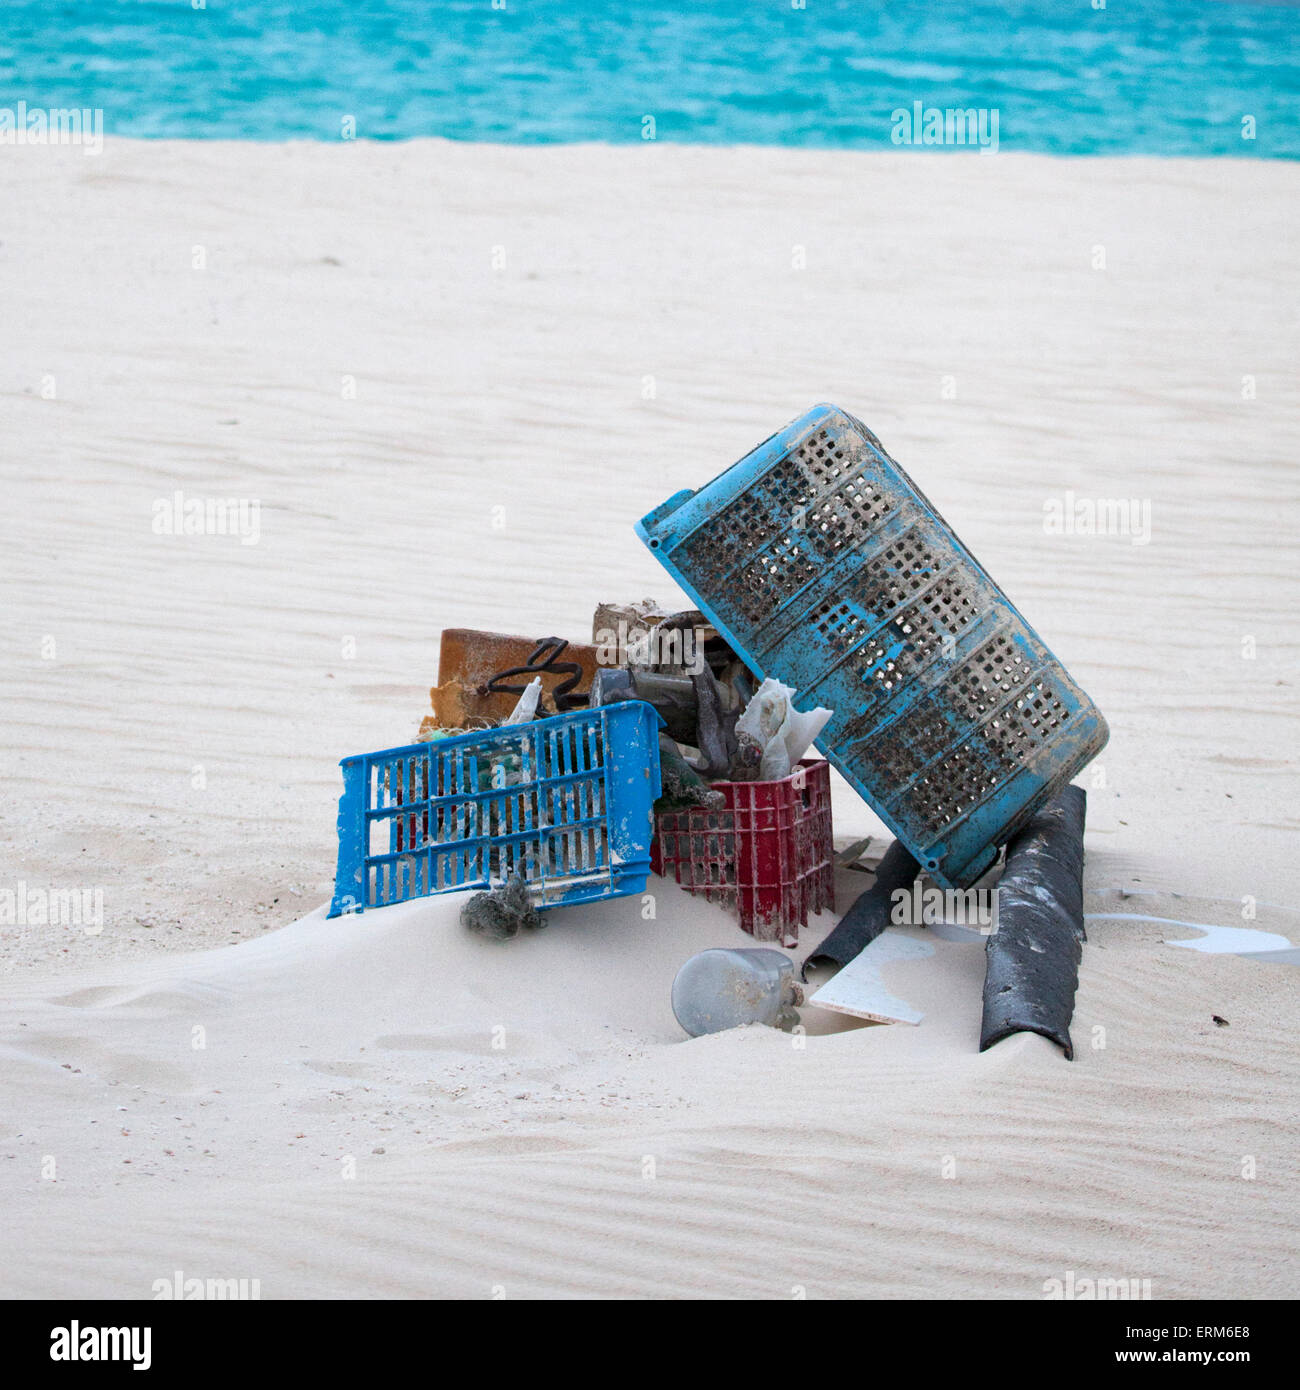 Plastic marine debris collected from beach for shipping off-island and disposal. Stock Photo